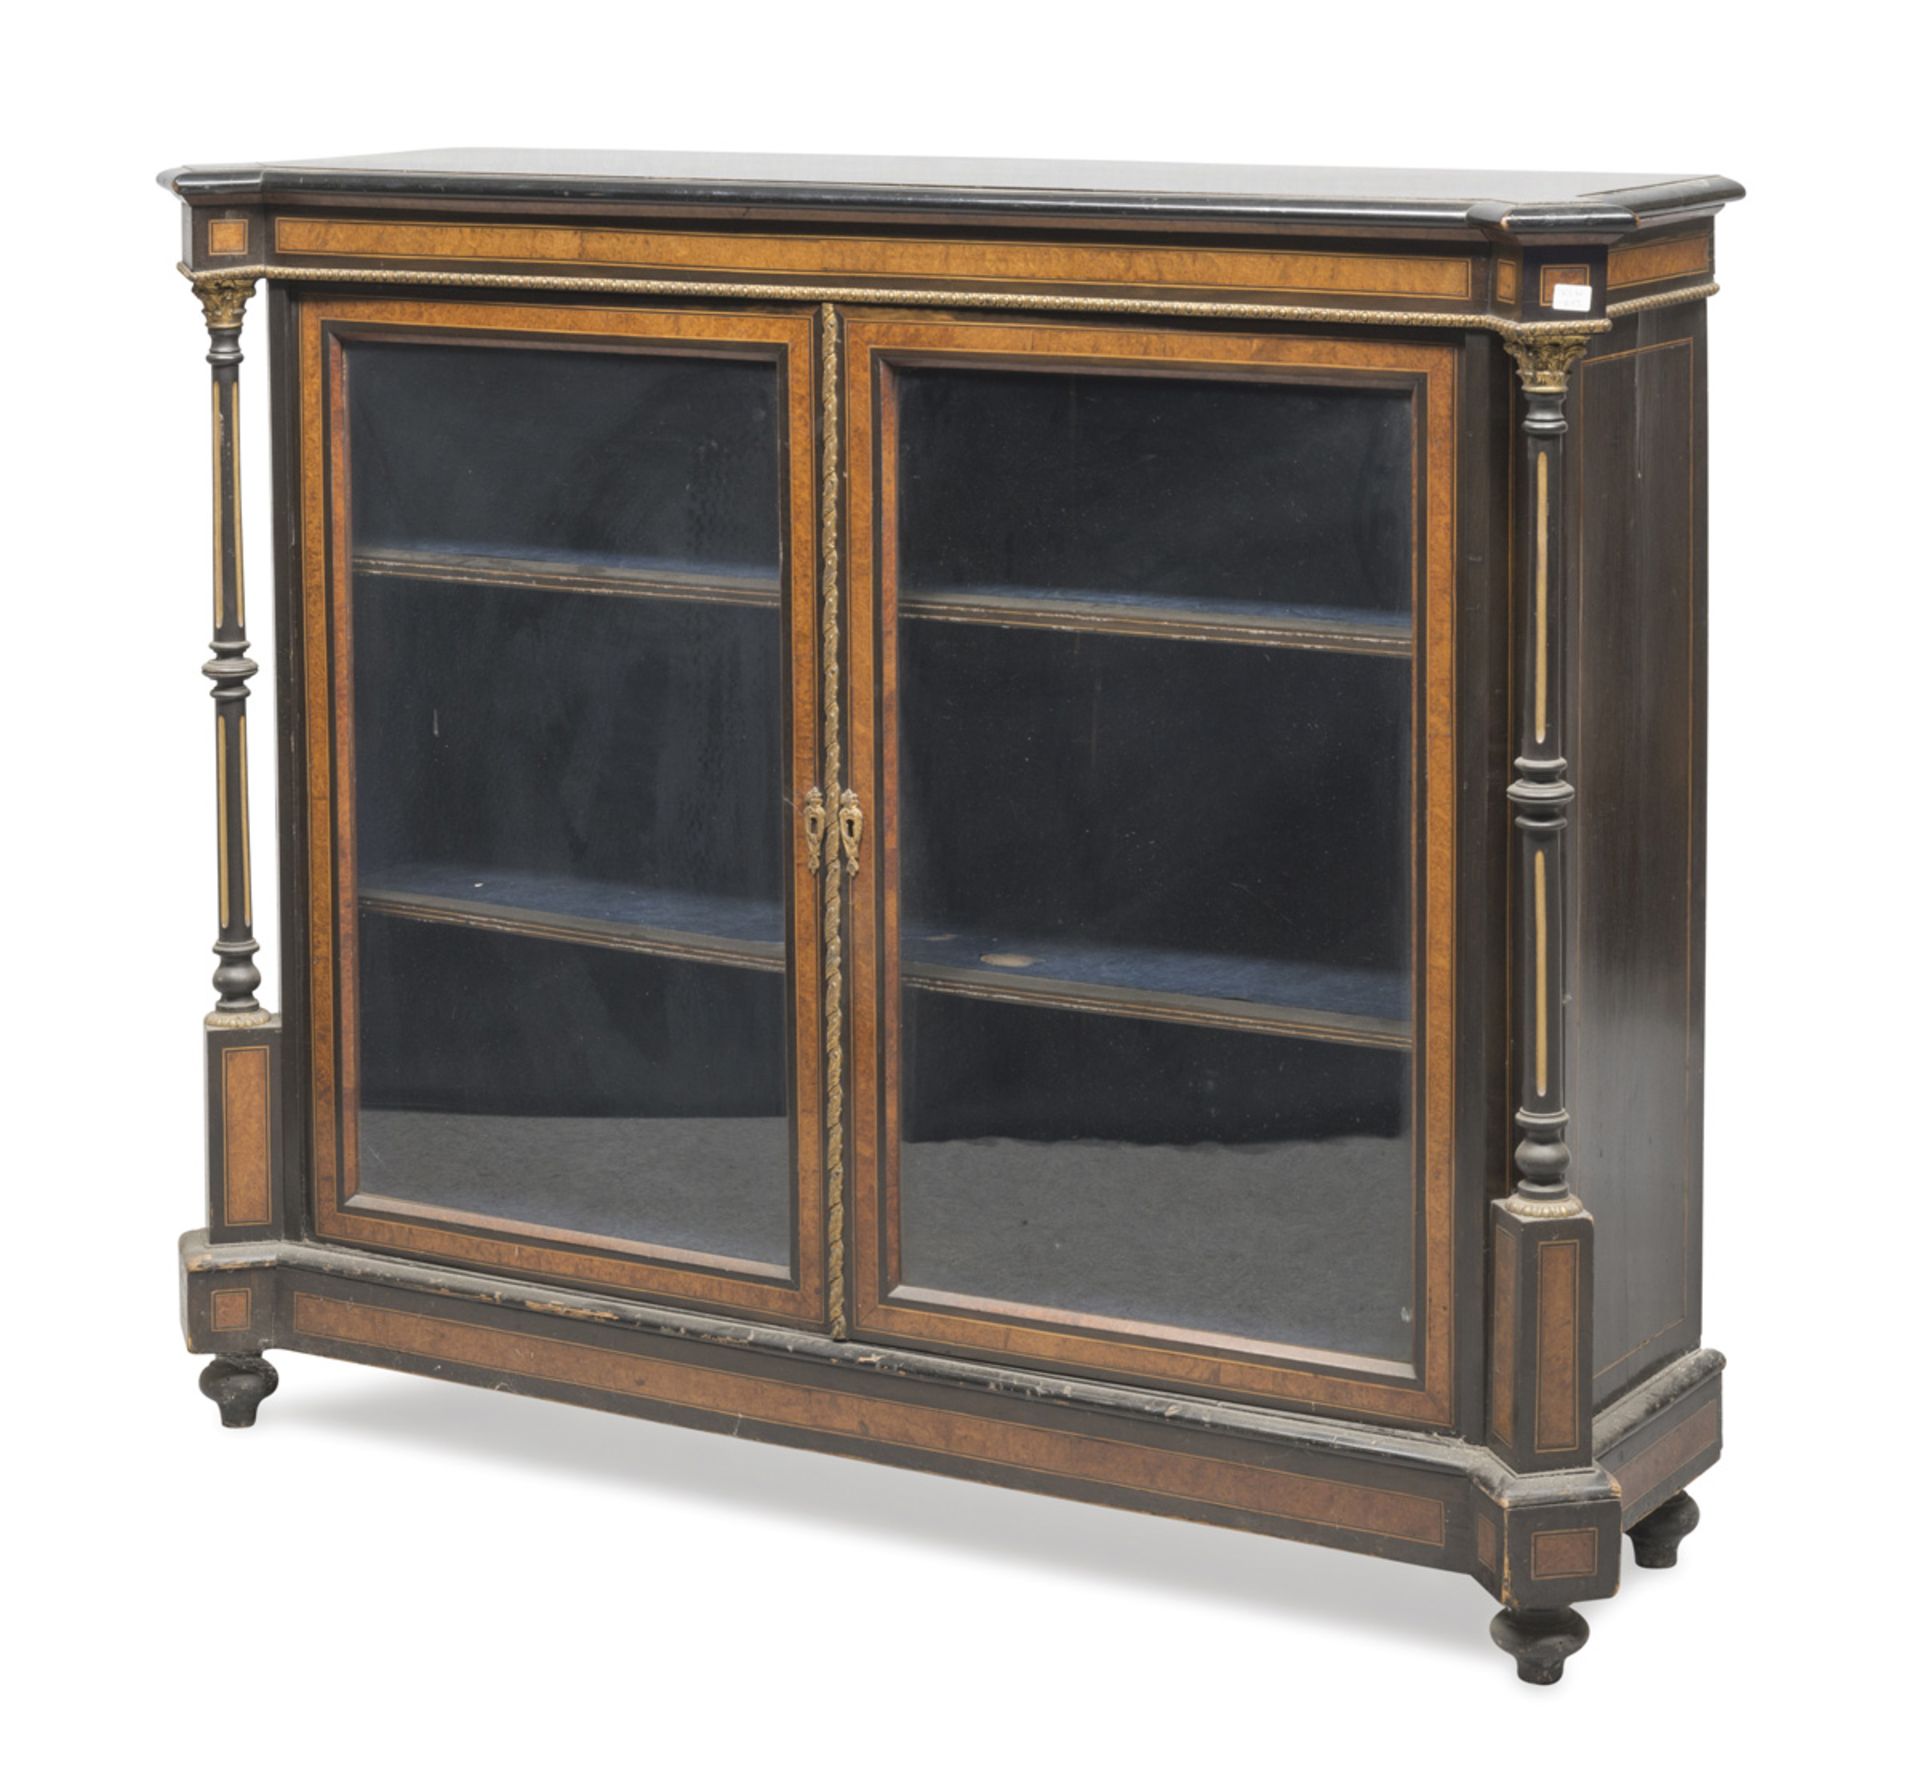 CABINET IN EBONY AND ELM TREE, FRANCE PERIOD NAPOLEON III with threads in satin wood. Two glass